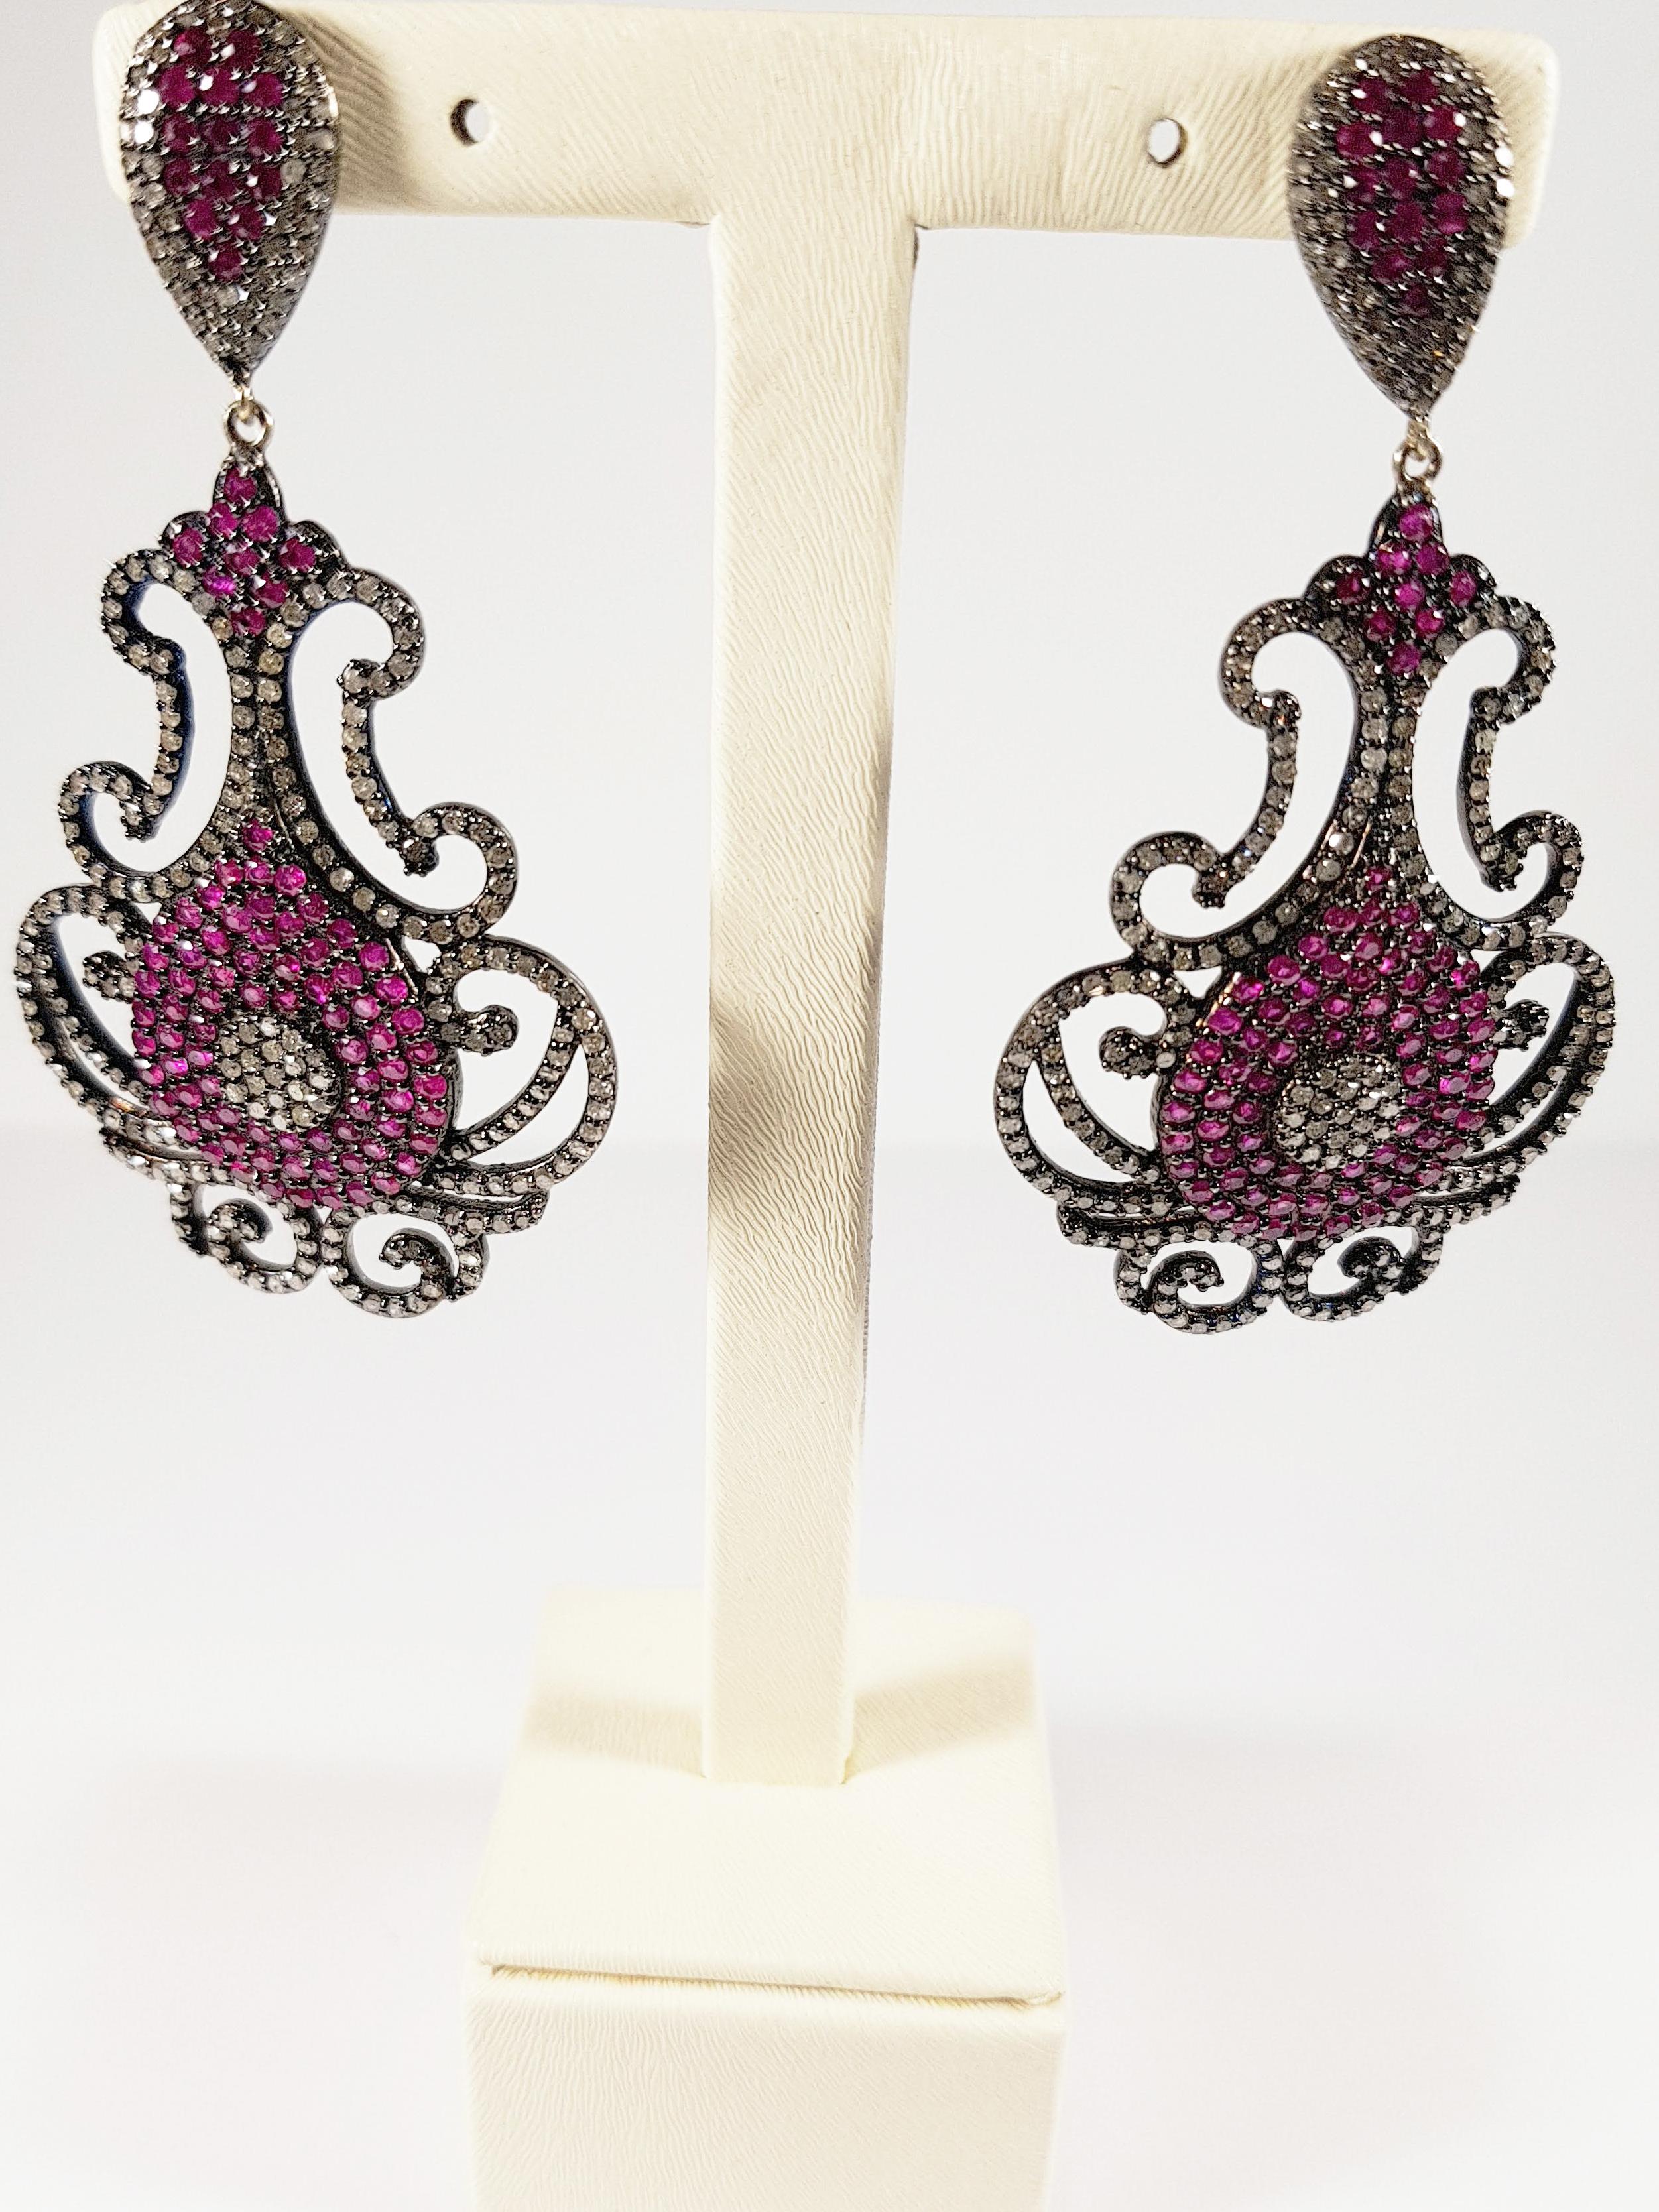 Chandelier Ruby, Diamond 14k gold earrings 
Irama Pradera is a Young designer from Spain that searches always for the best gems and combines classic with contemporary mounting and styles
She creates many Jewels in her atelier in Bilbao, and she